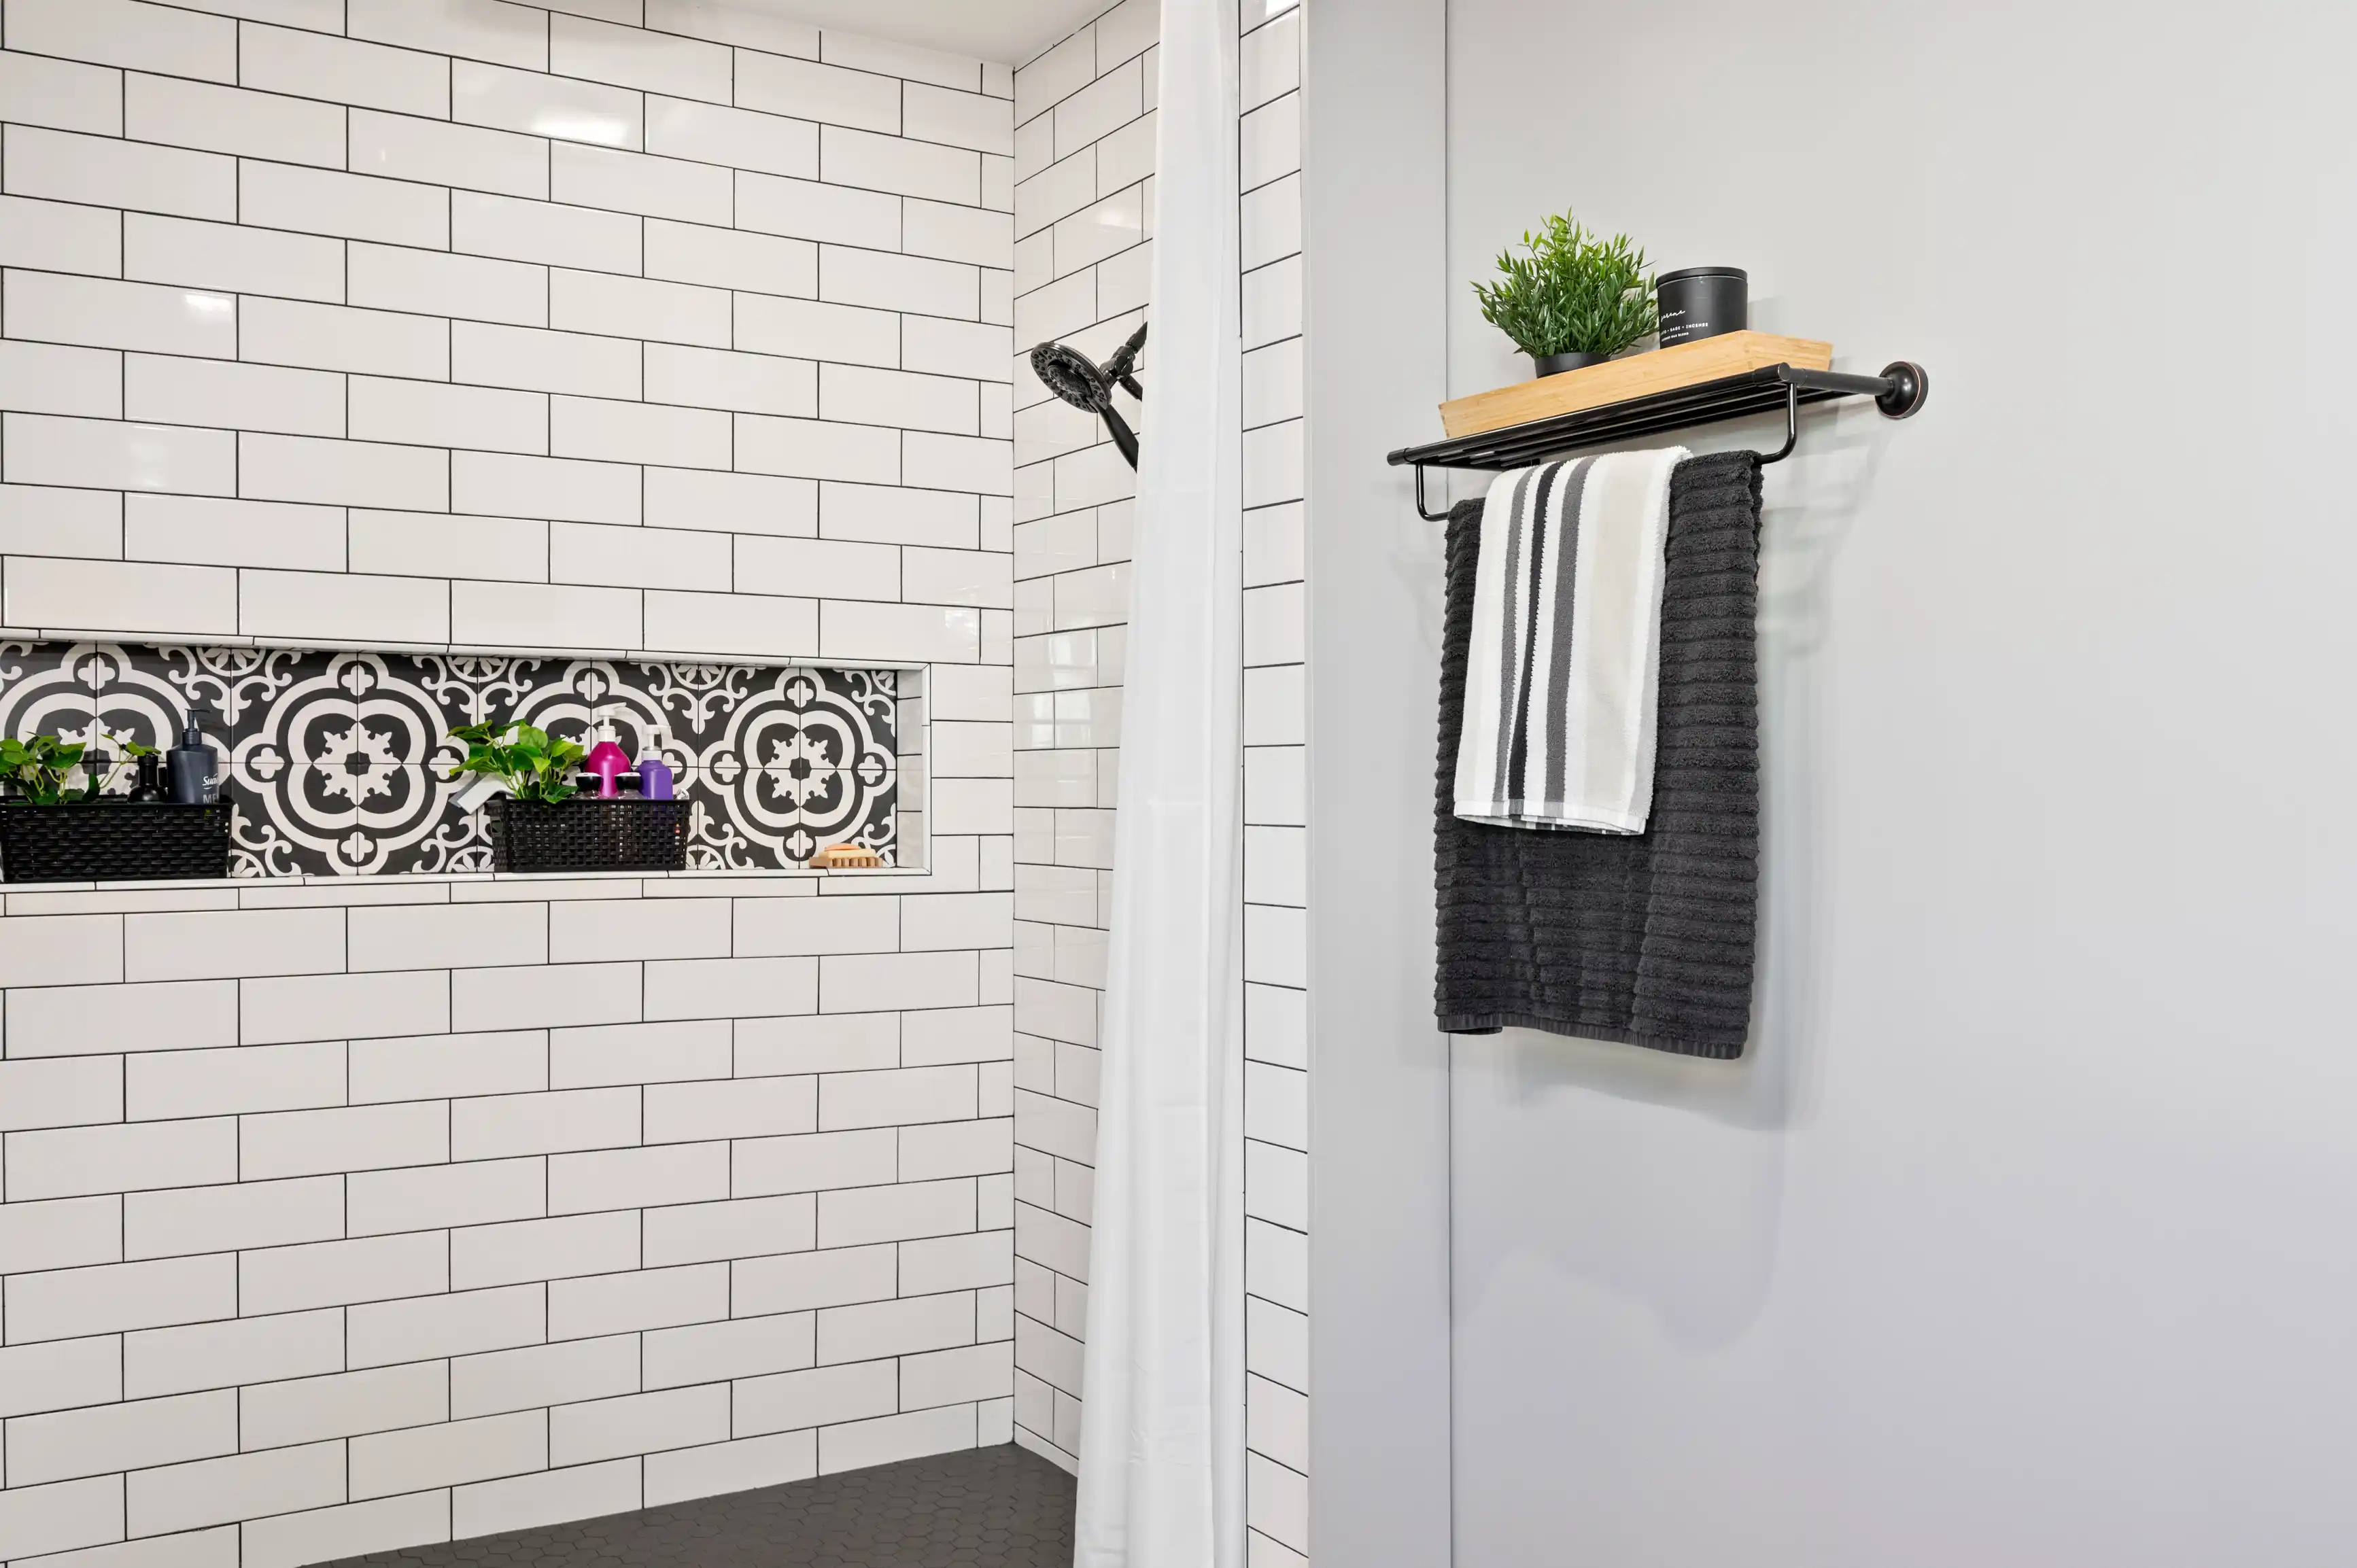 Modern bathroom interior with white subway tiles, decorative patterned accent tiles, shower head, and towel rack with black and white towels.